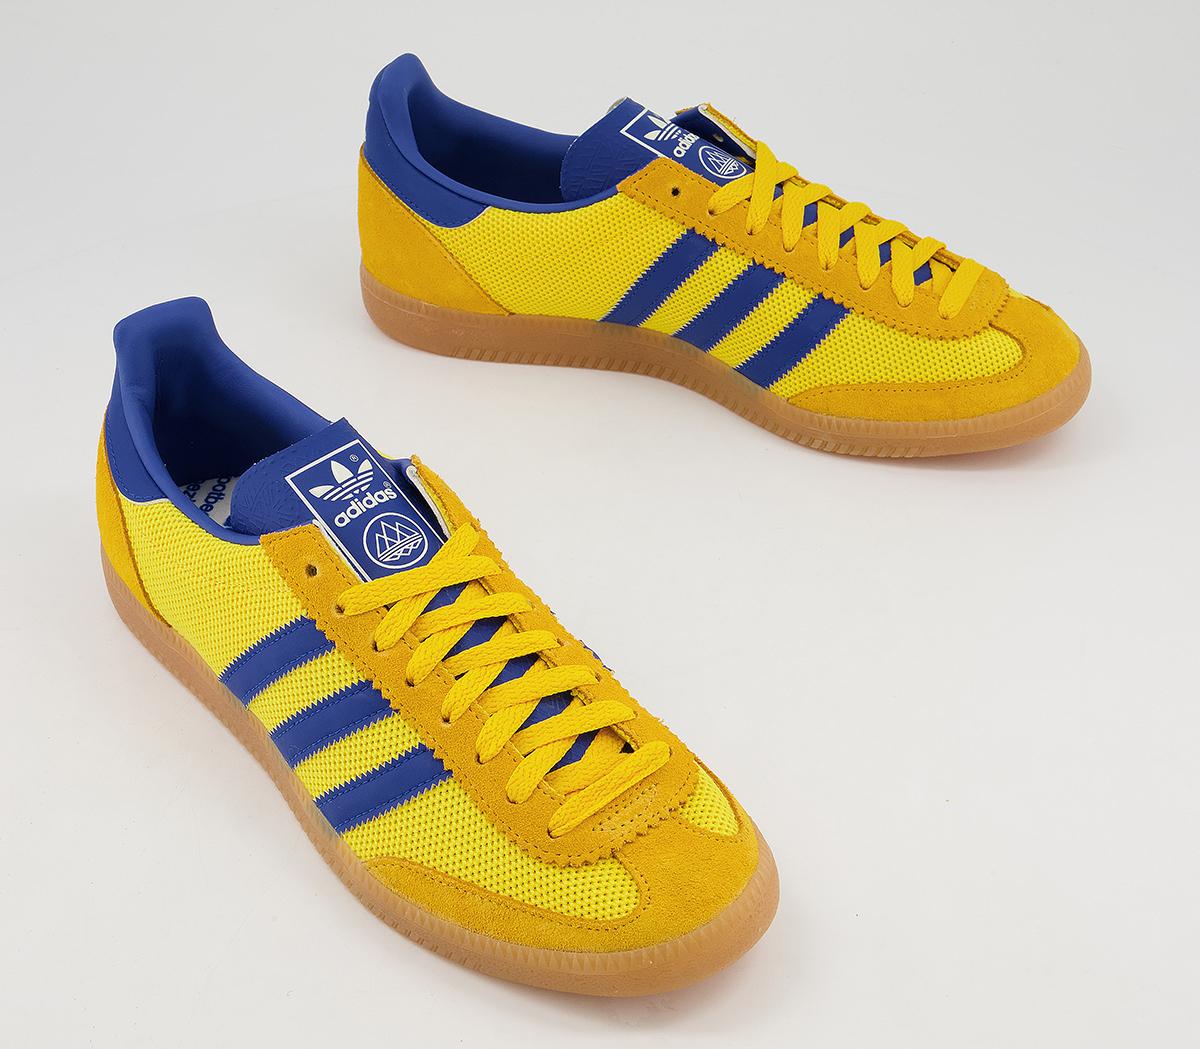 adidas Malmo Net Spzl Trainers Bold Gold - His trainers